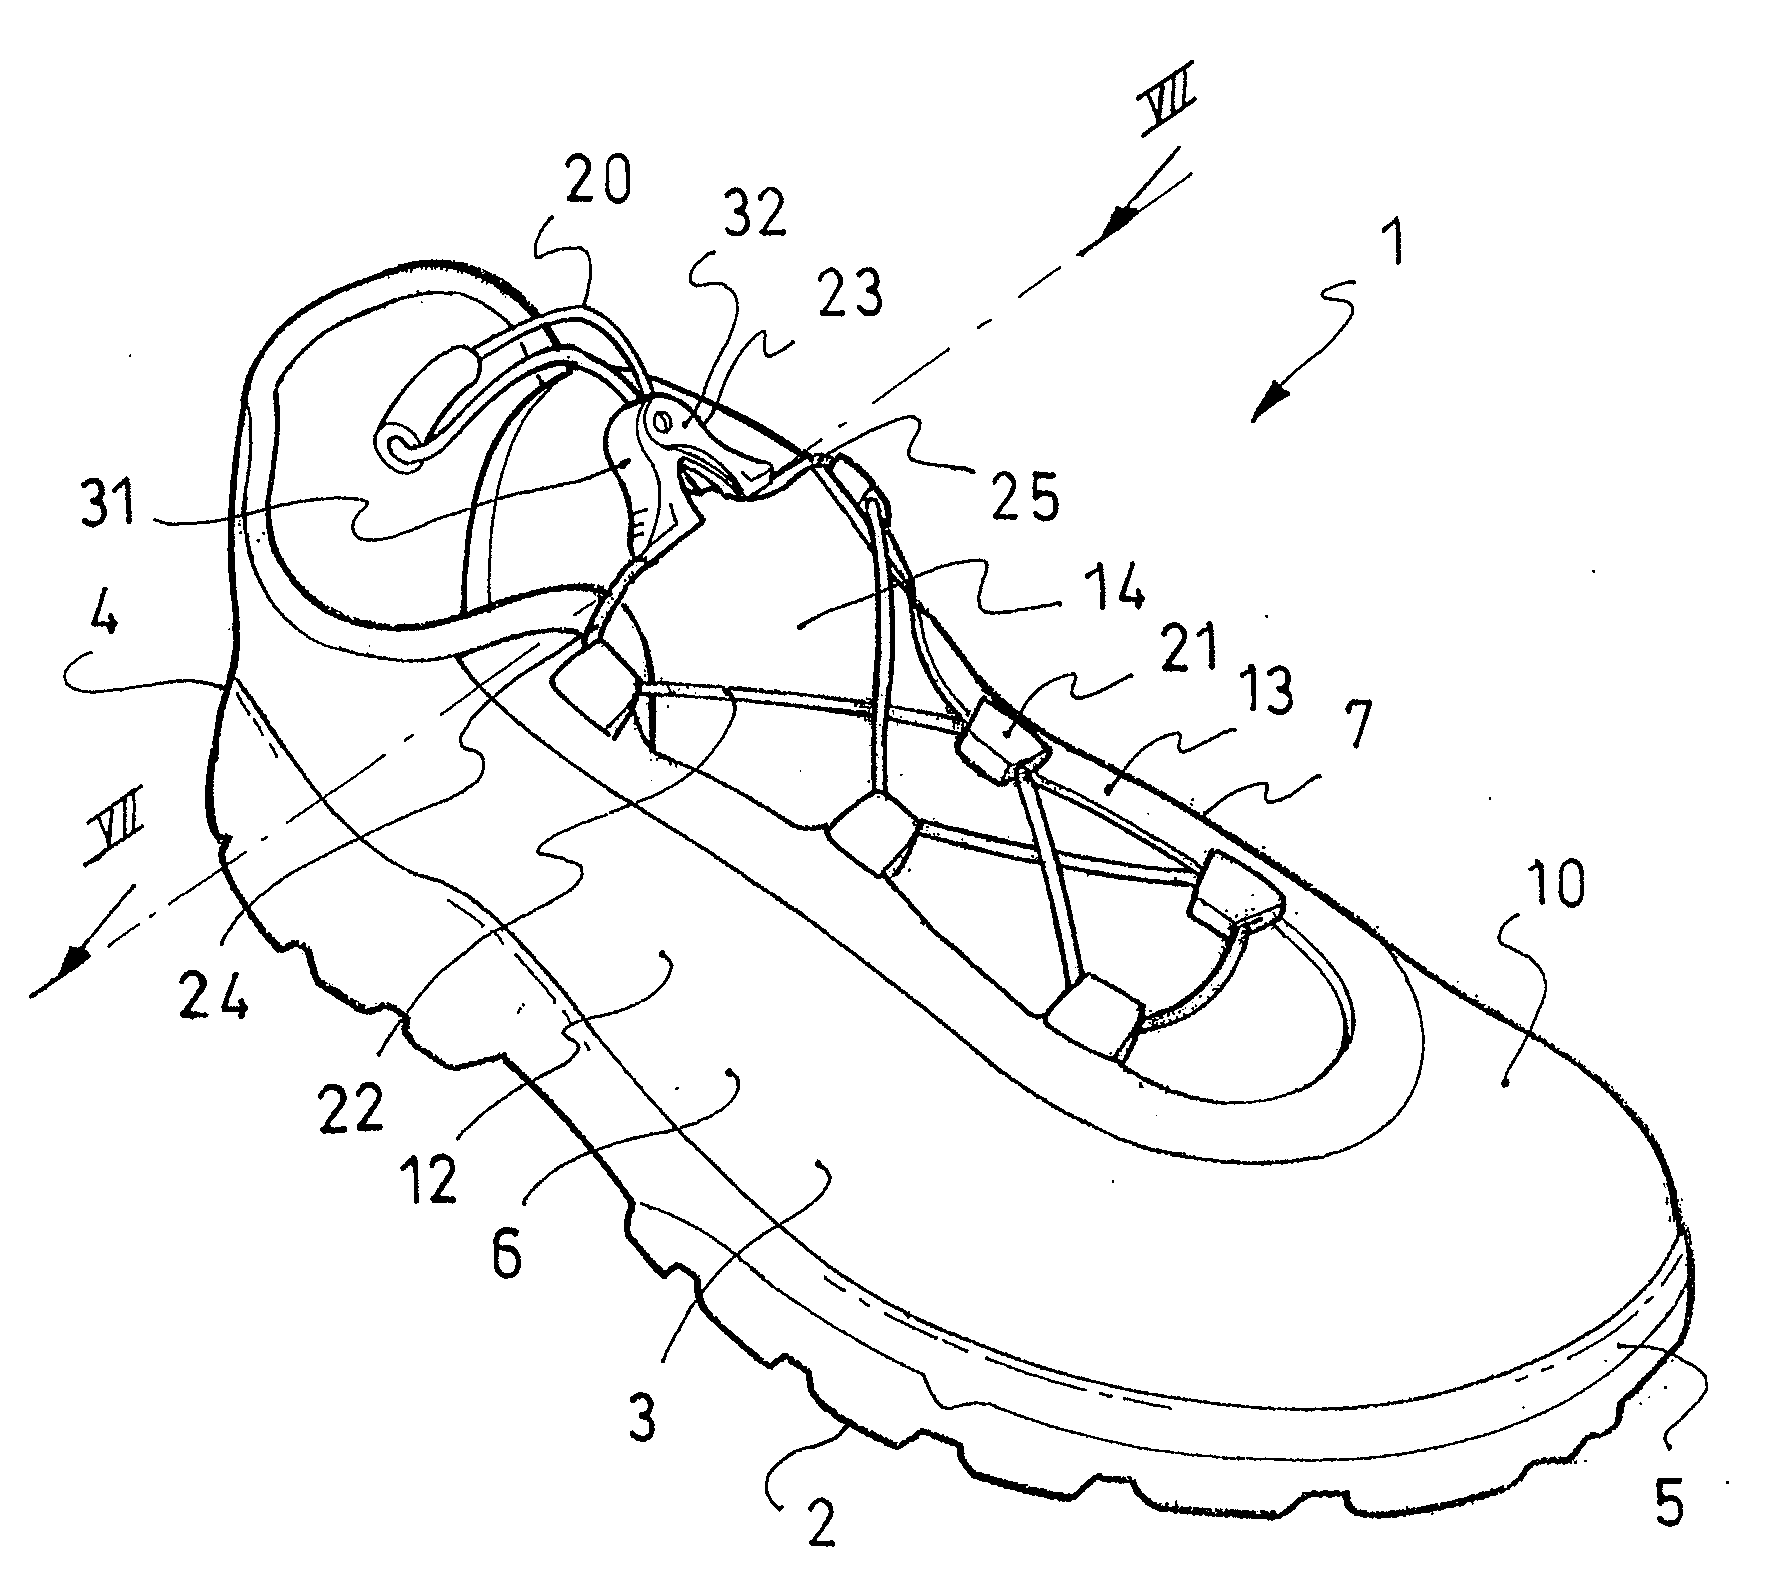 Device for locking flexible strands